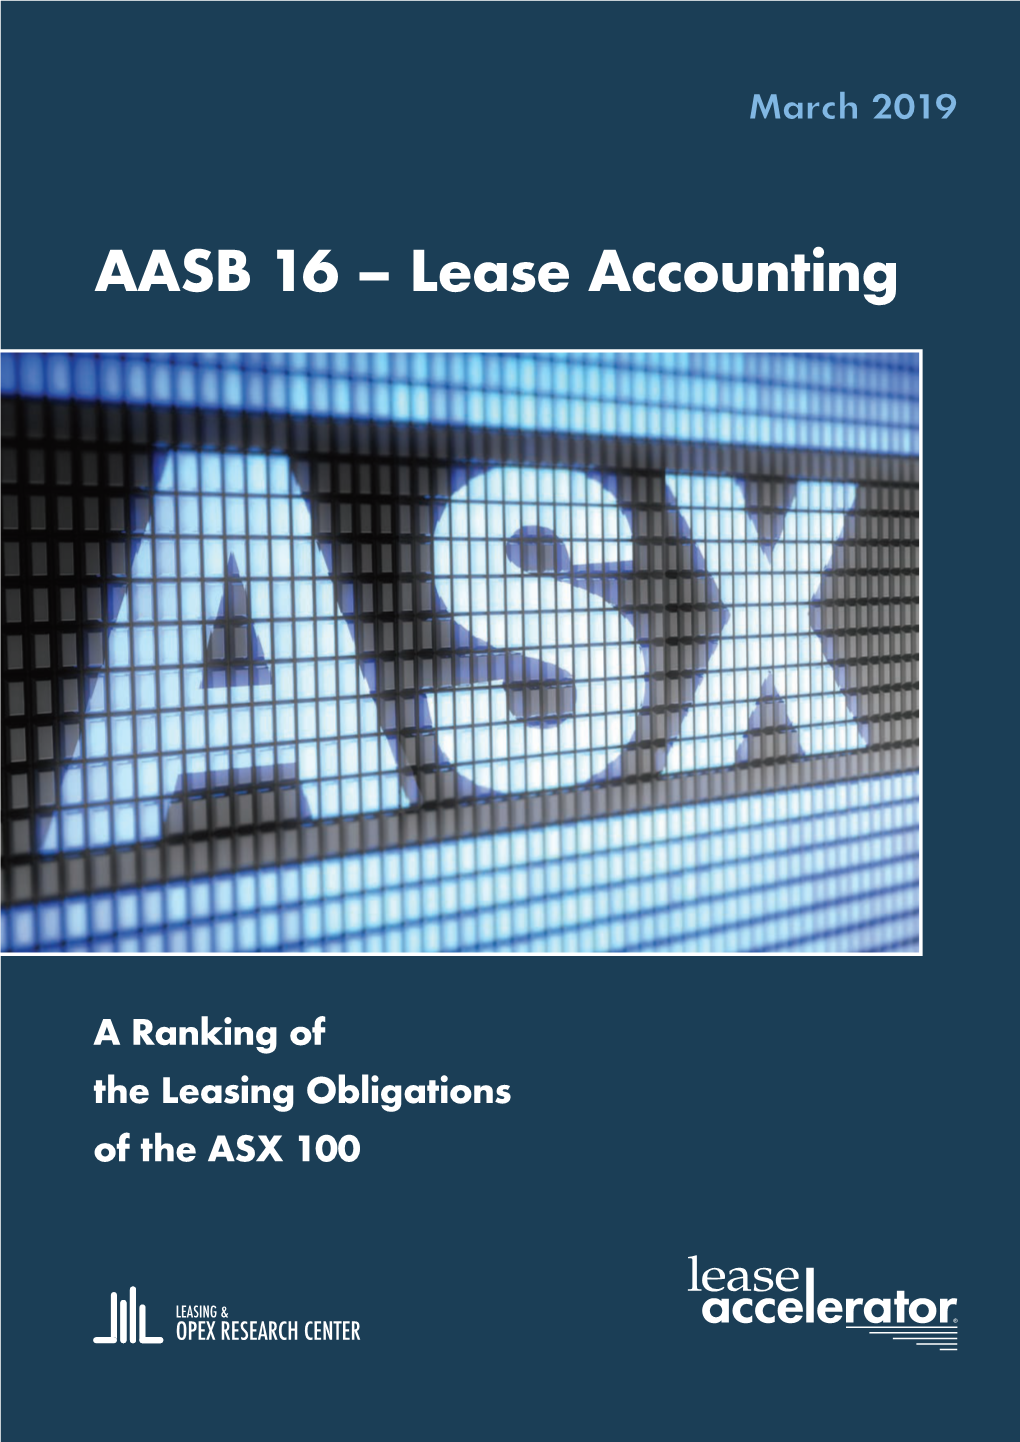 A Ranking of the Leasing Obligations of the ASX 100 AASB 16 – Lease Accounting a Ranking of the Leasing Obligations of the ASX 100 MARCH 2019